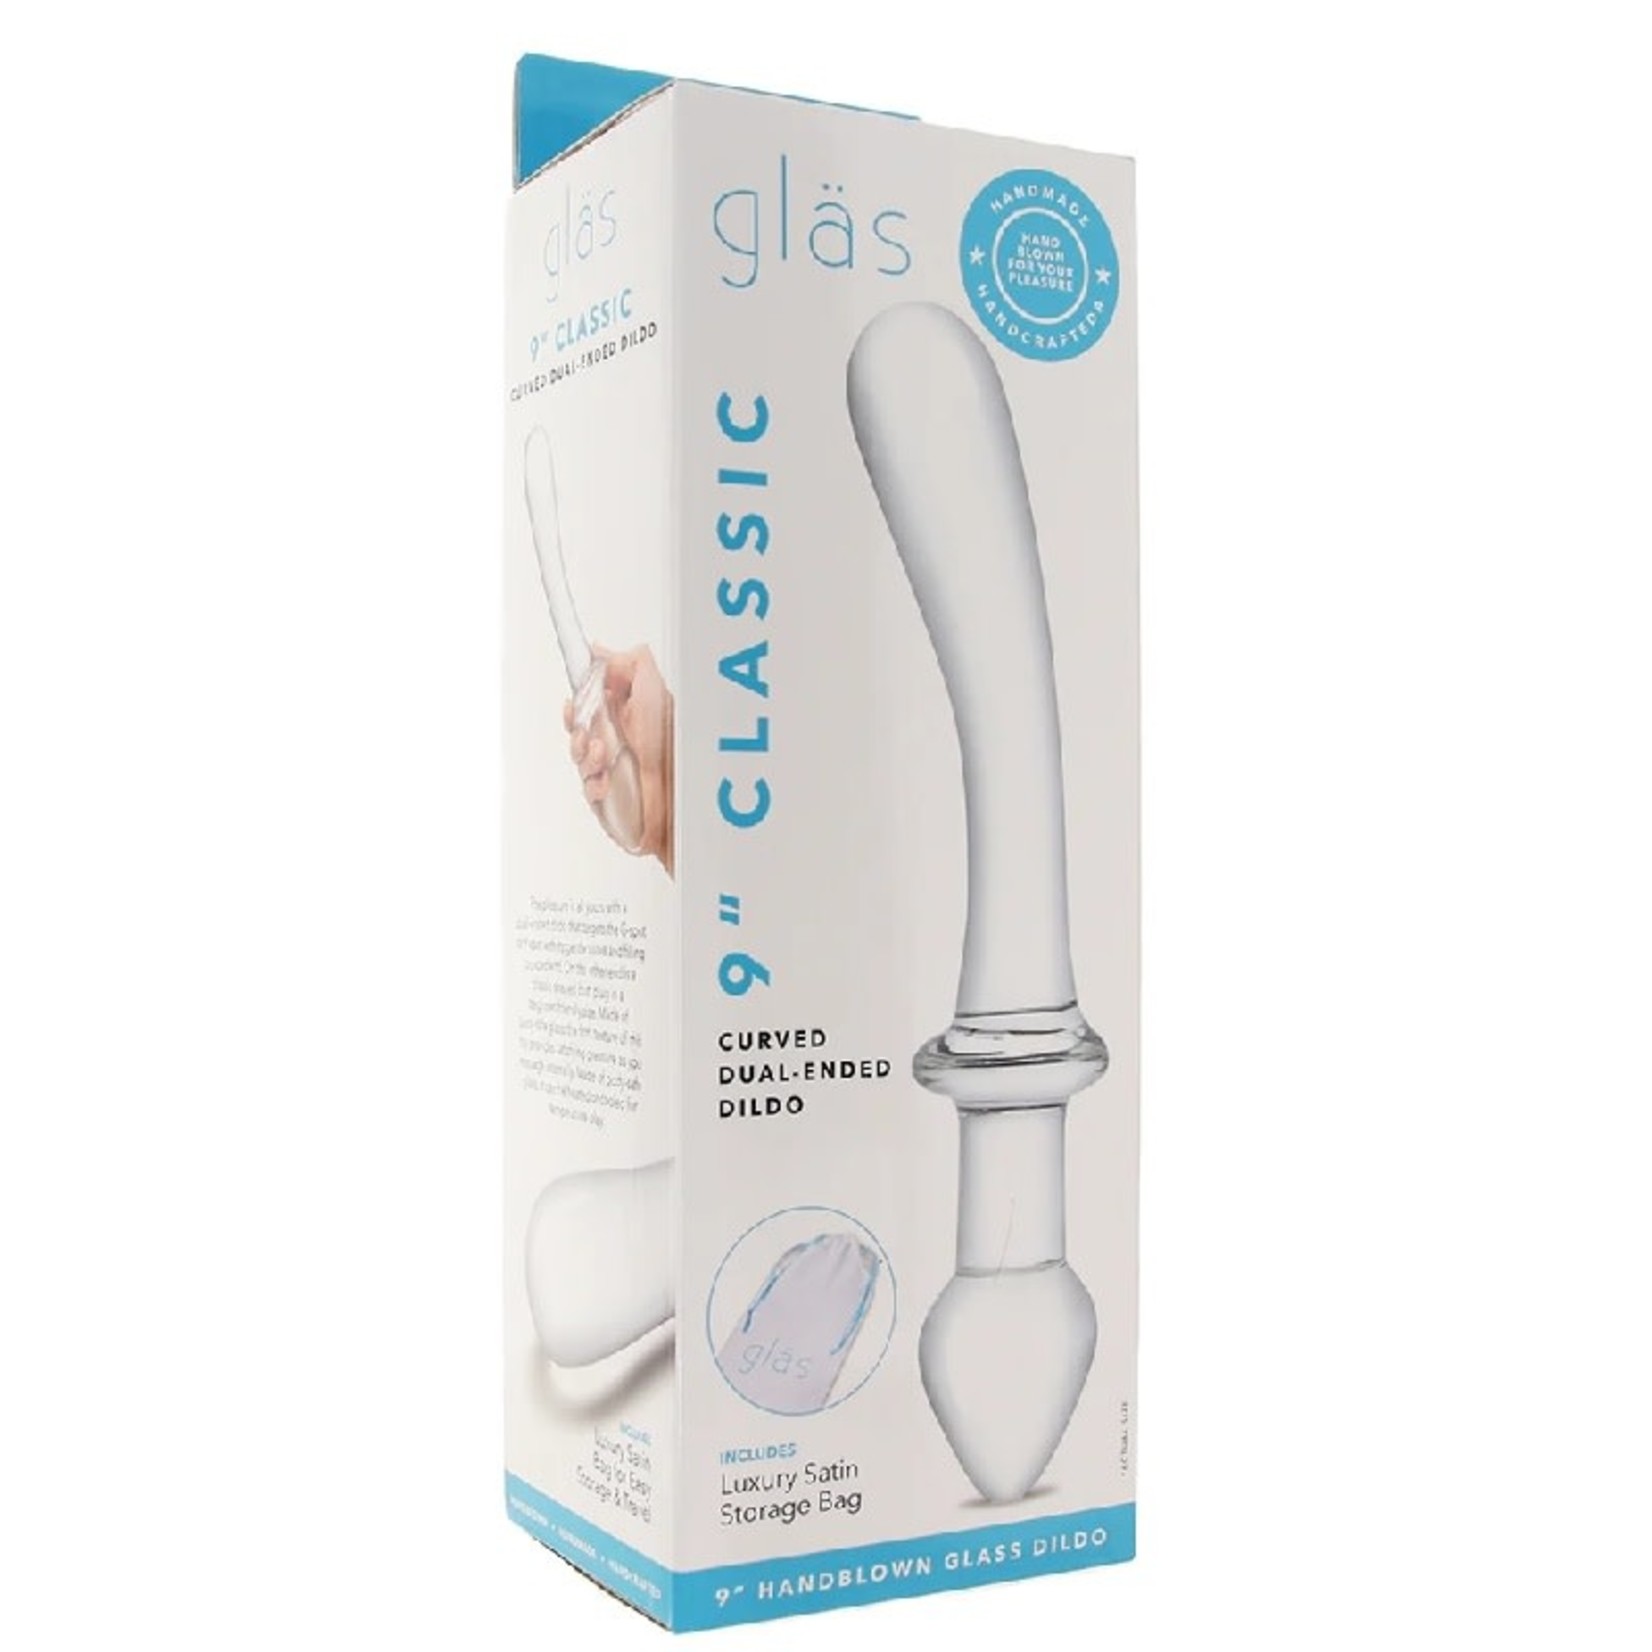 GLAS GLAS CLASSIC CURVED 9 INCH DUAL ENDED DILDO